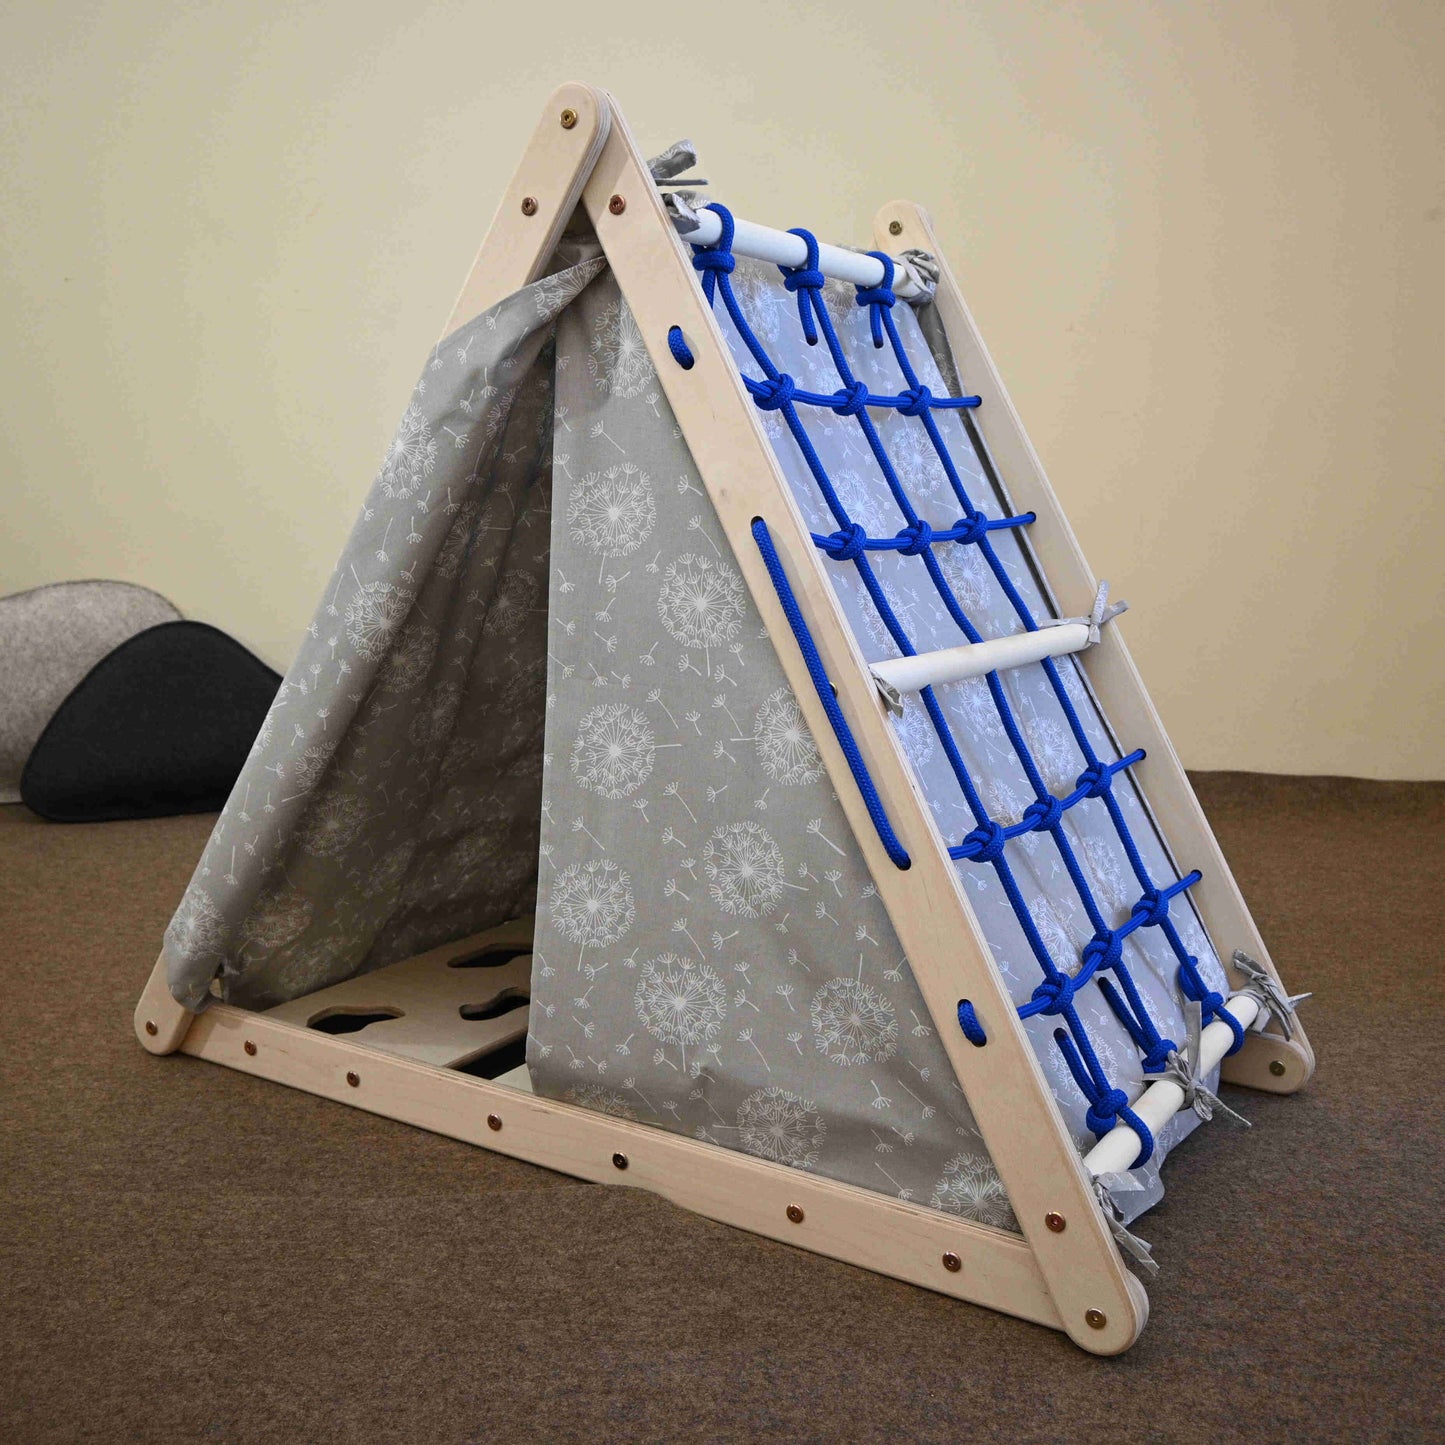 Tent for climbing triangle, various designs